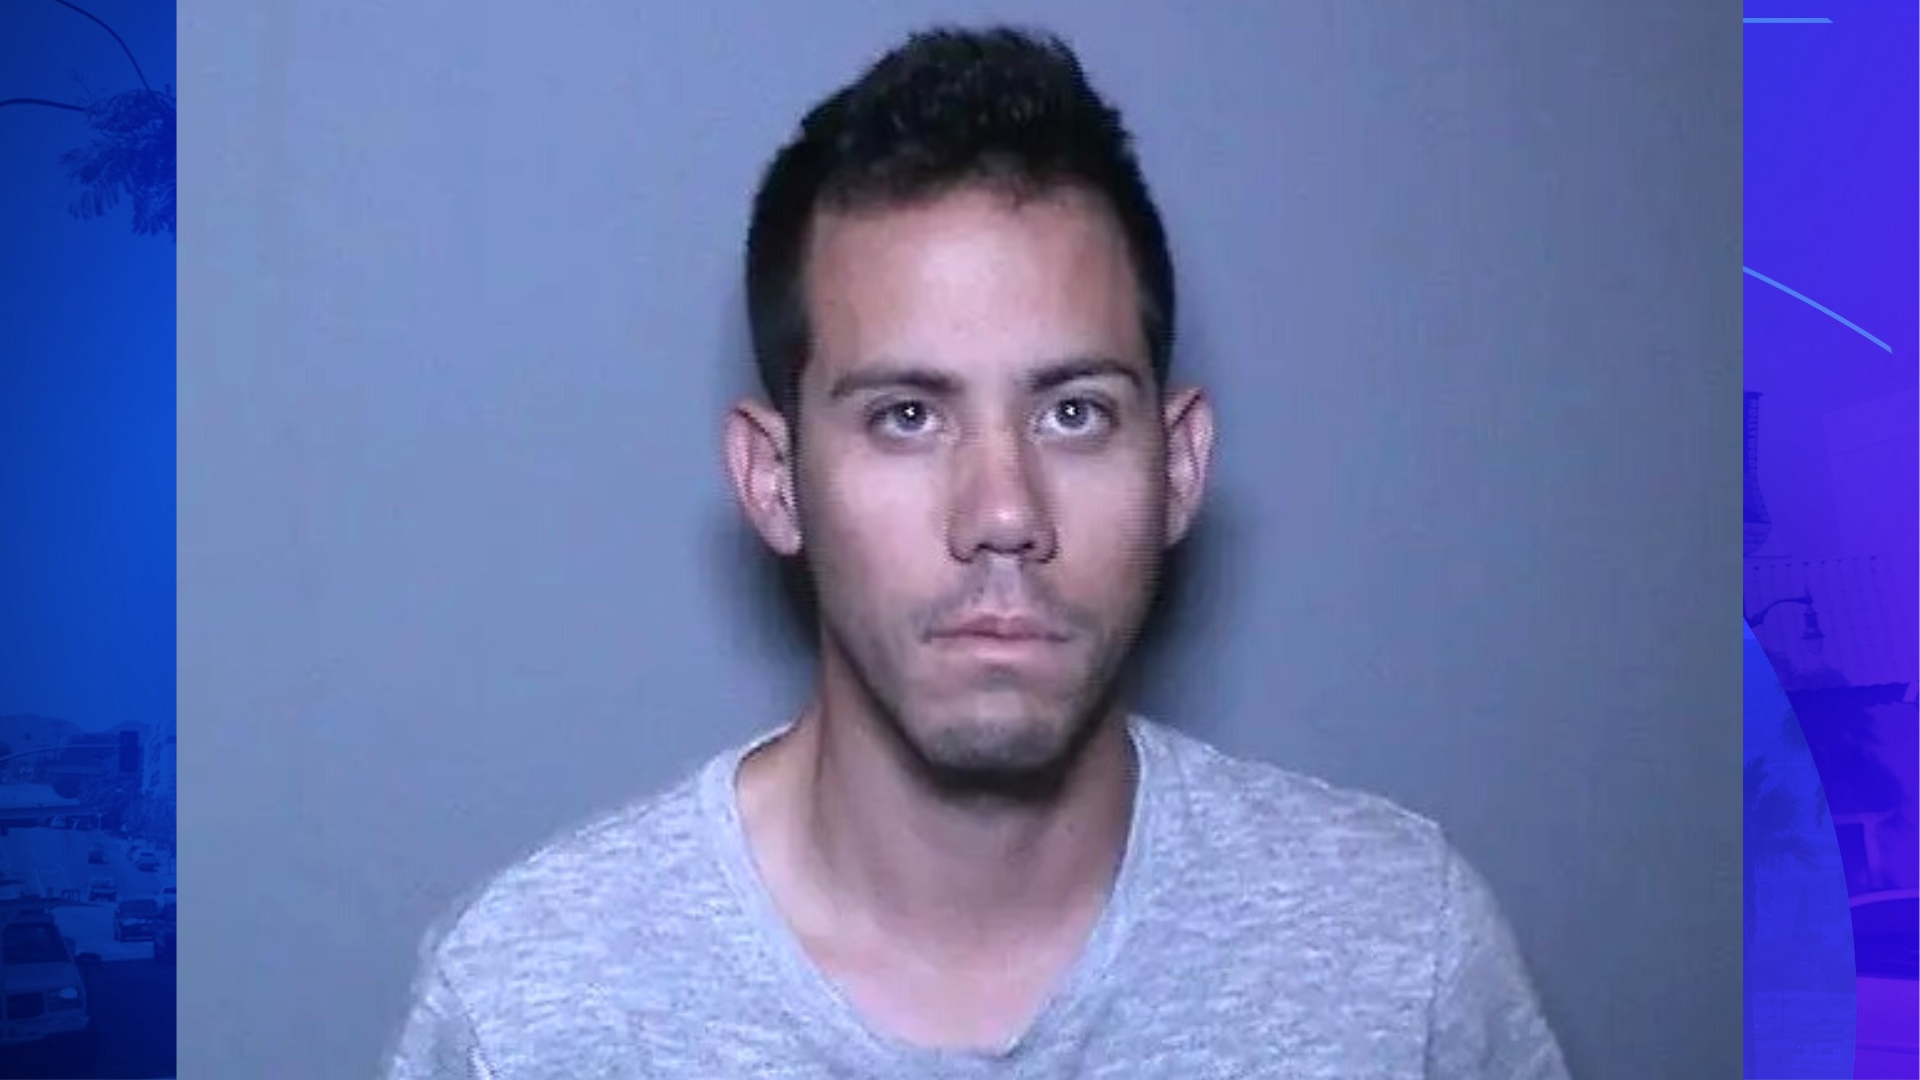 Matthew Zakrzewski is shown in a photo released by the Orange County District Attorney's Office on May 22, 2019.